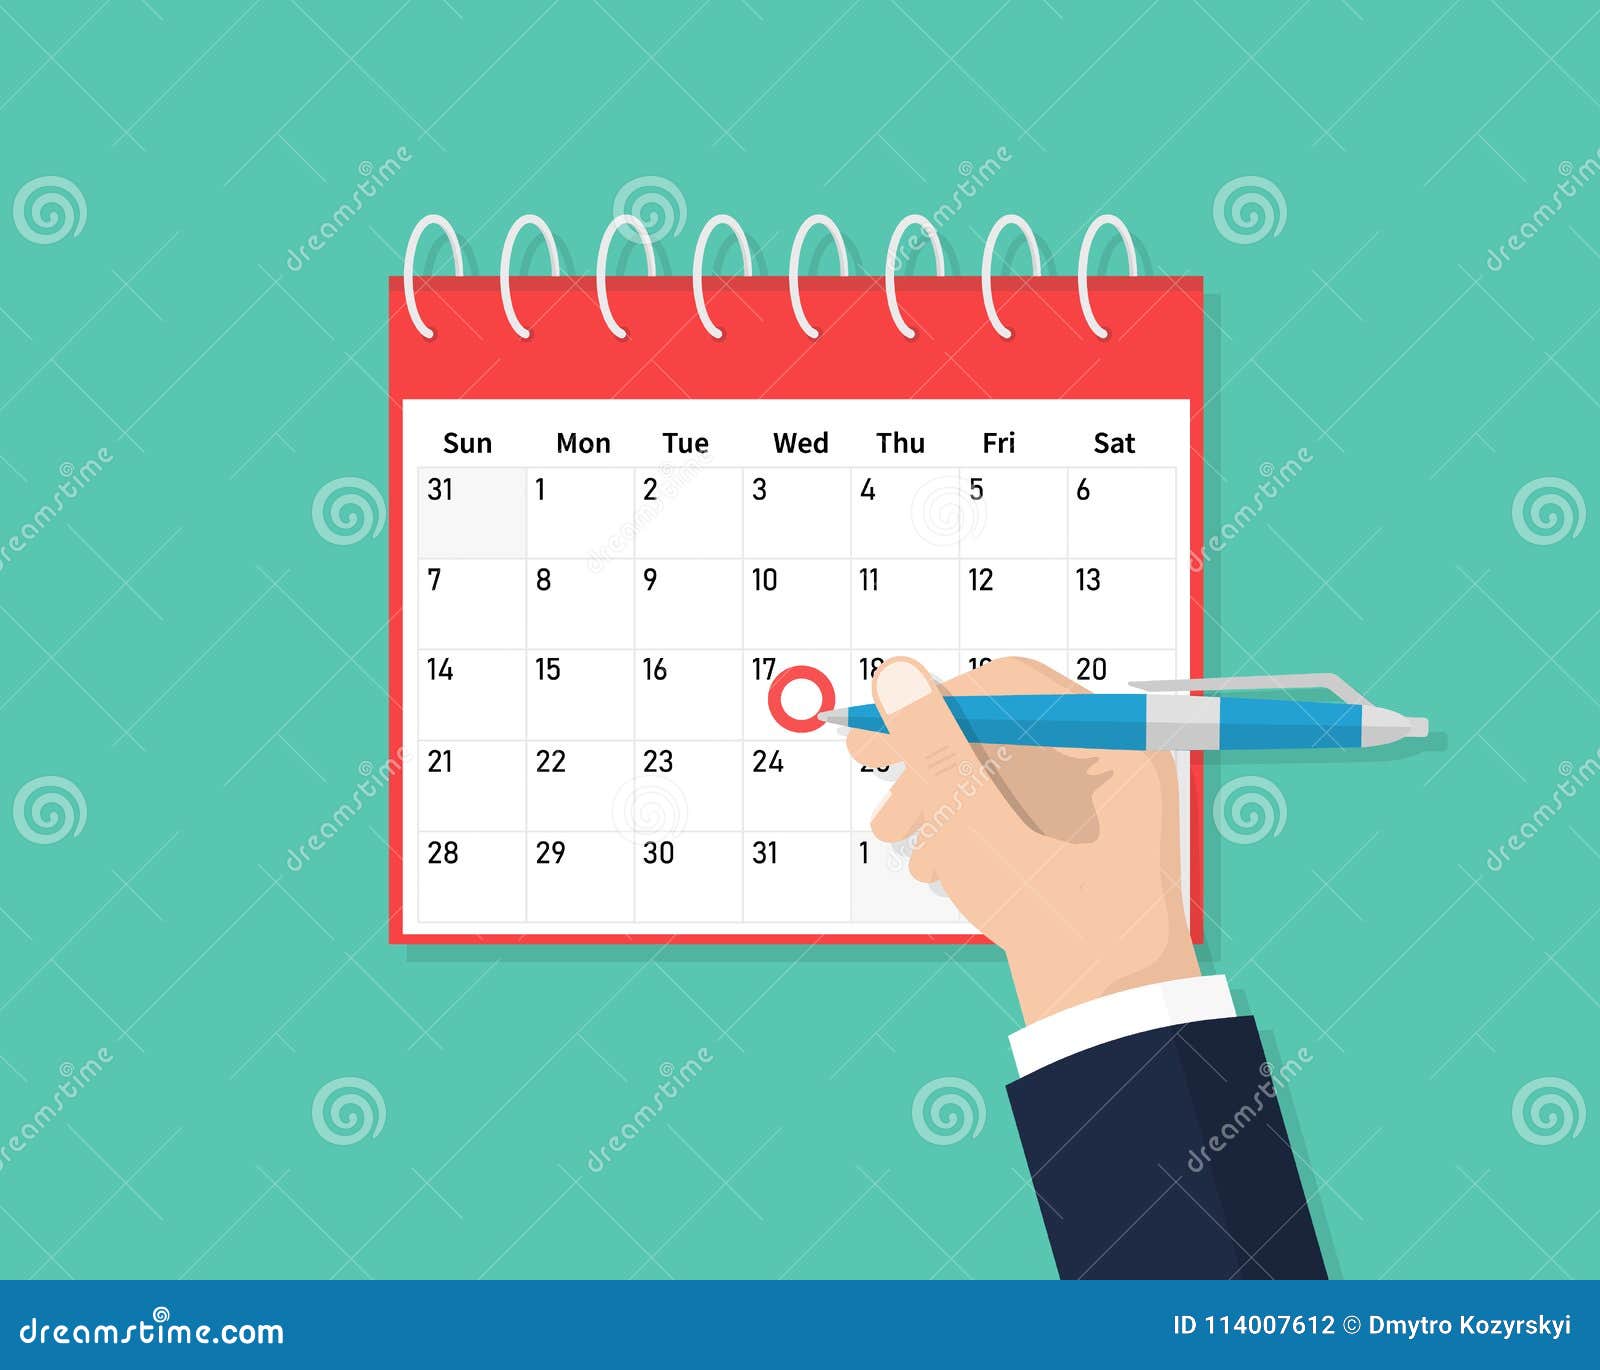 calendar on the wall and hand marking one day on it. save the date. calendar flat icon. schedule, appointment, organizer